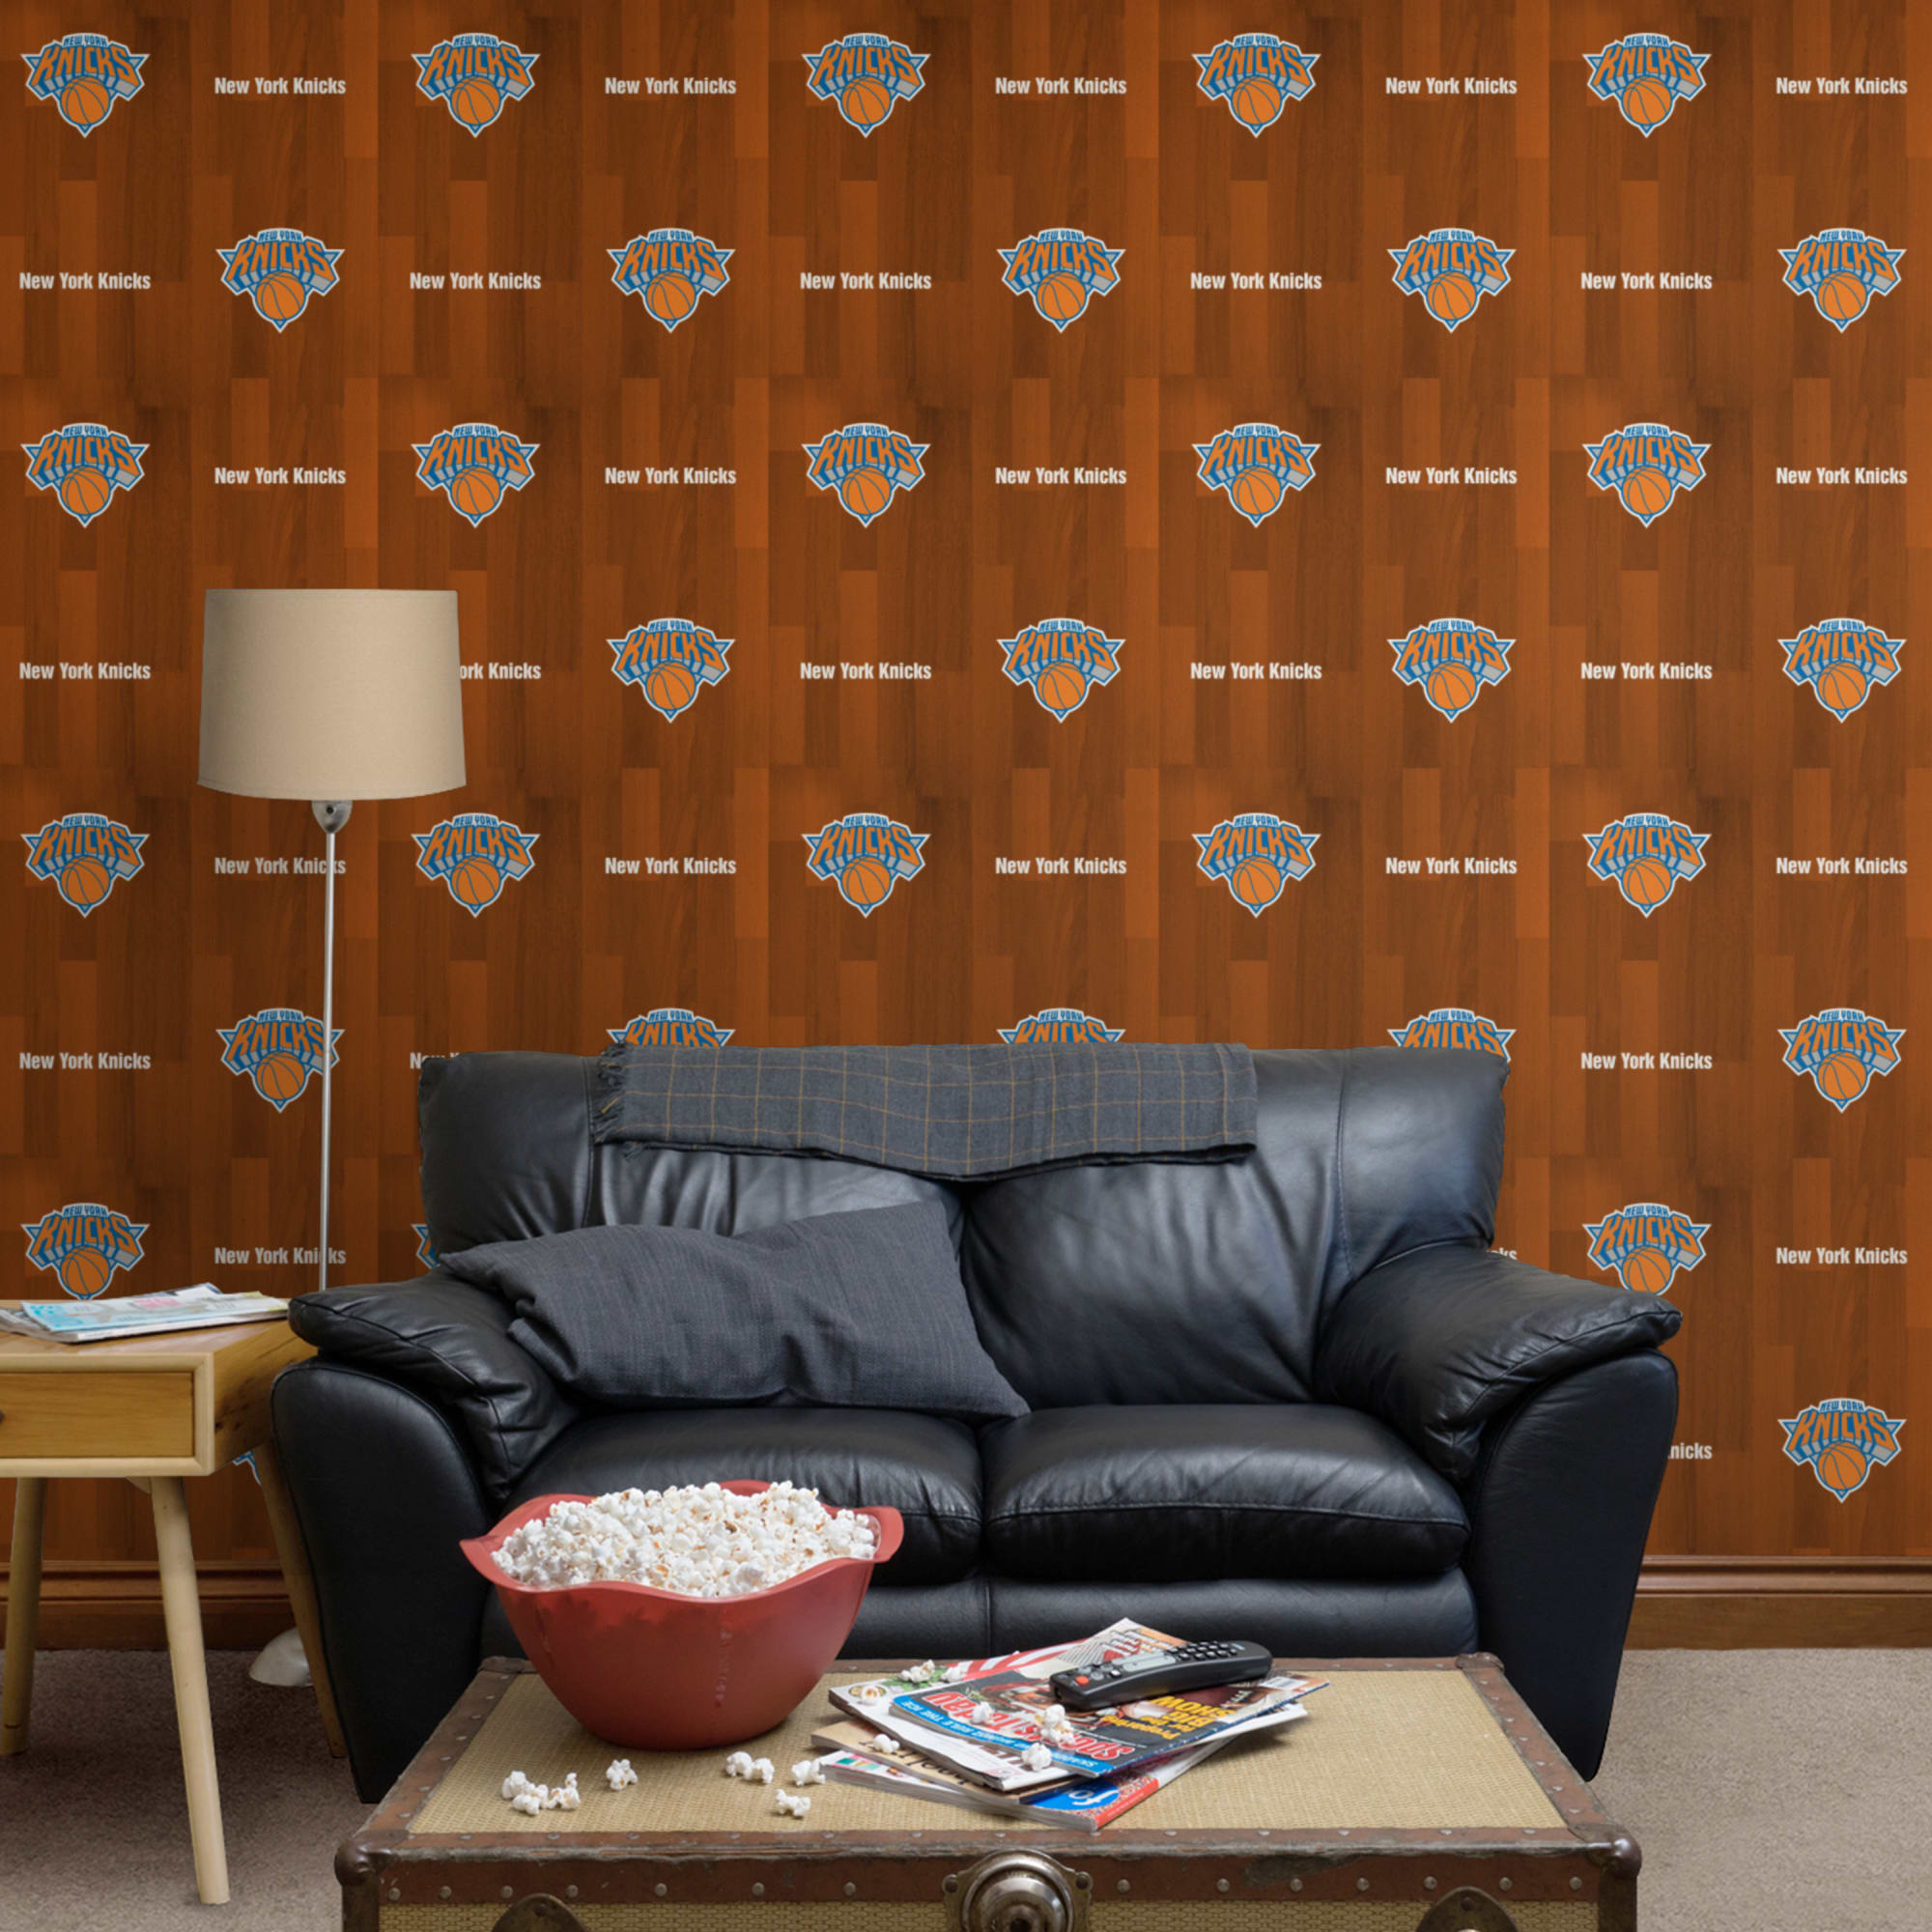 New York Knicks: Hardwood Pattern - Officially Licensed Removable Wallpaper 12" x 12" Sample by Fathead